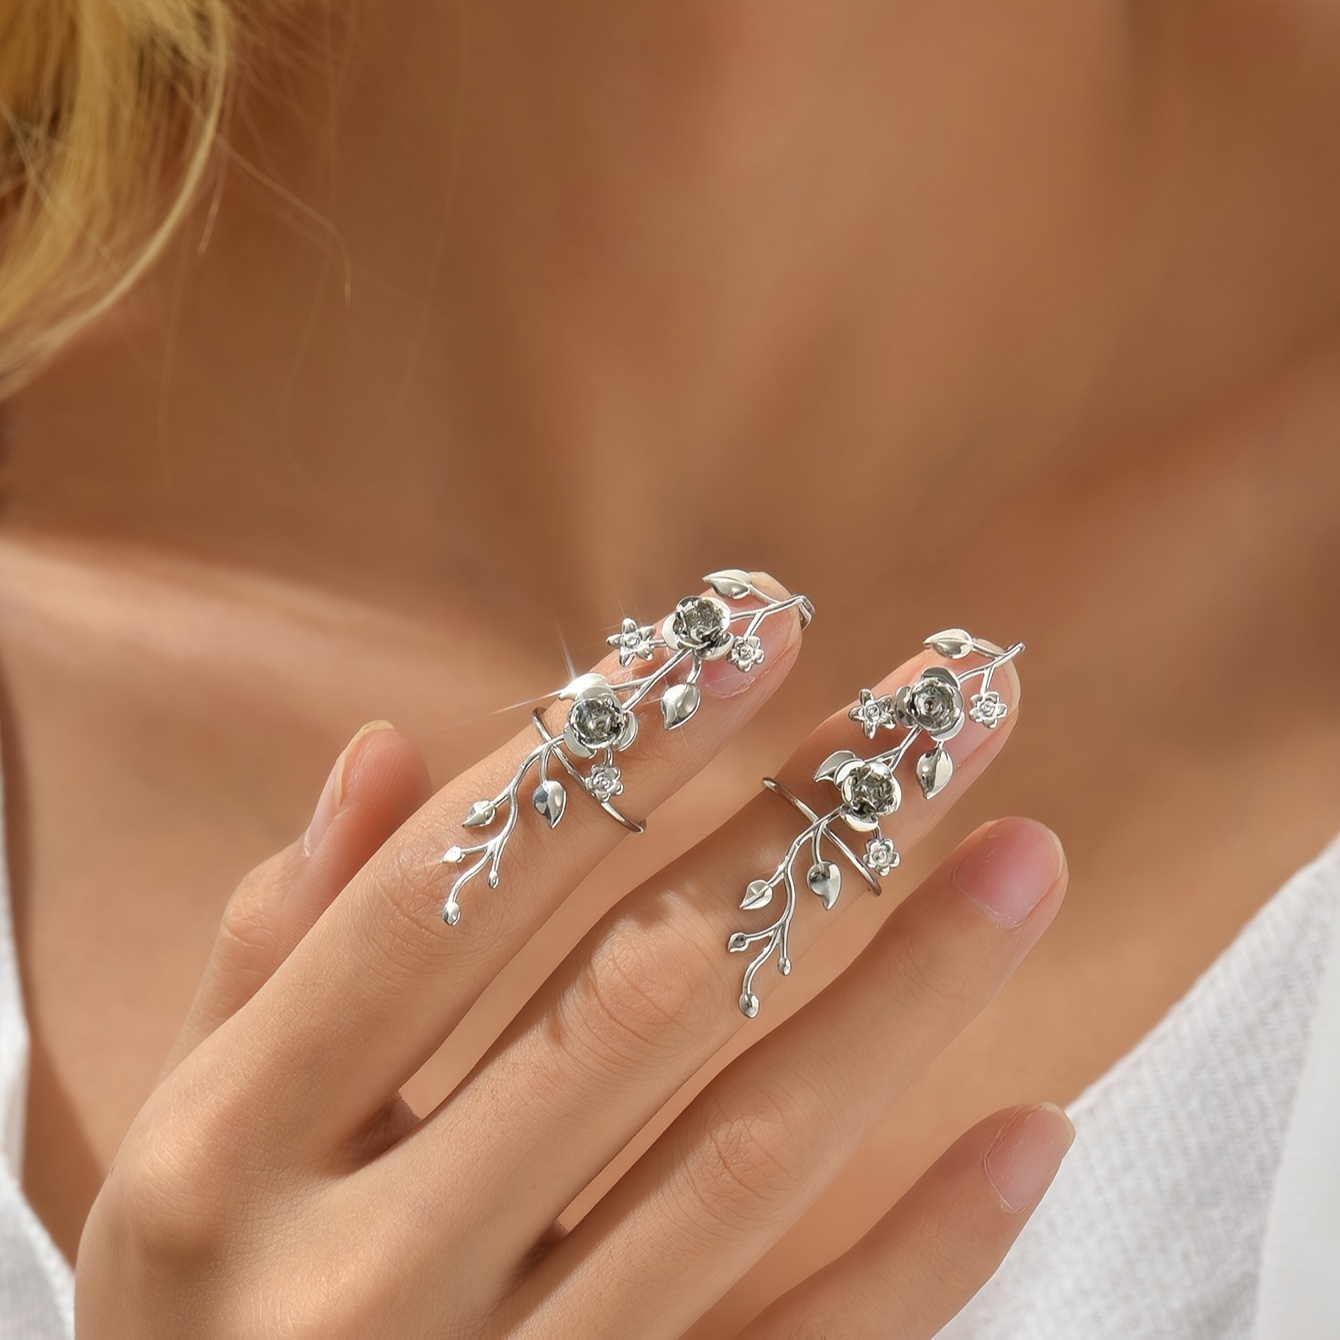 

Stylish Flower Finger Drag Armor Beautiful Ring Personality Jewelry For Party Banquet Club